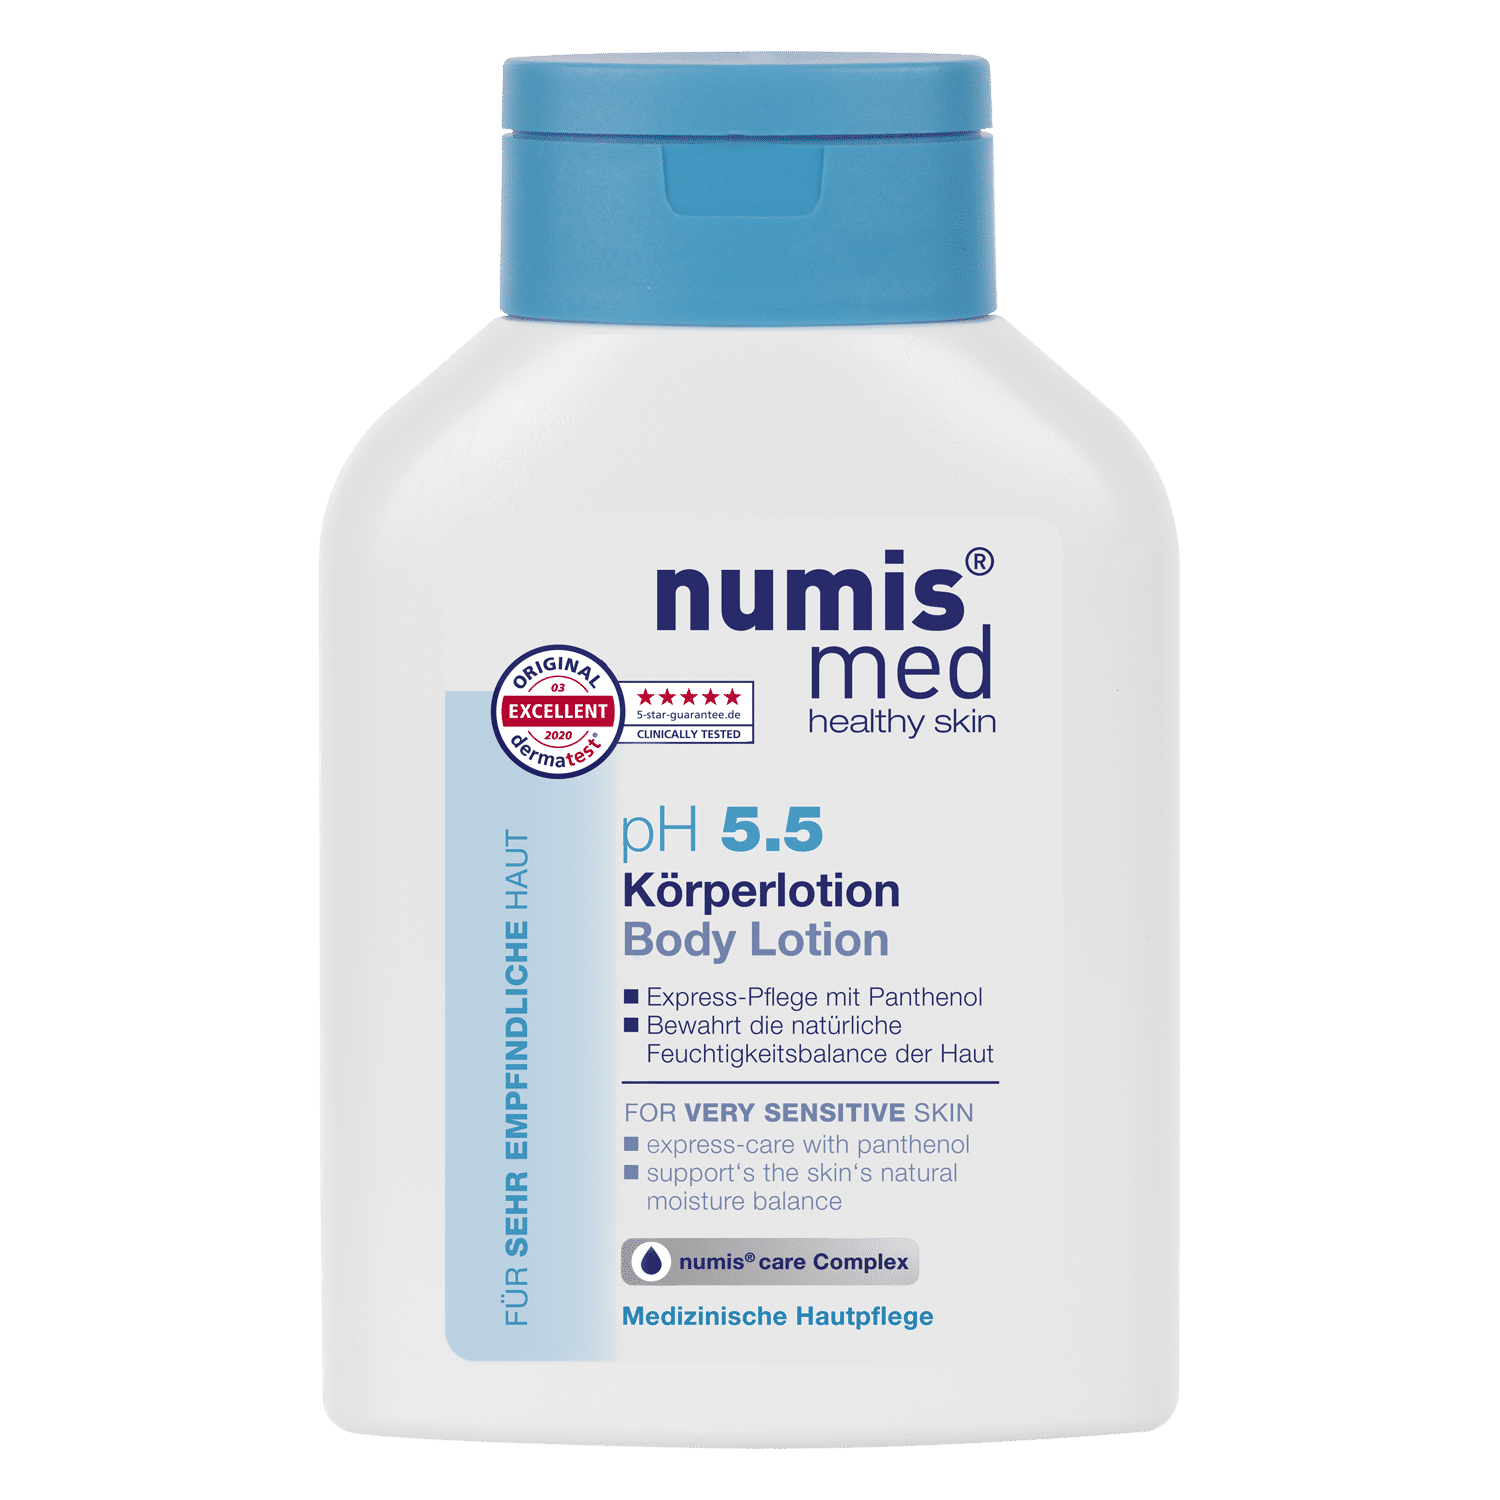 Numis Med Body Lotion